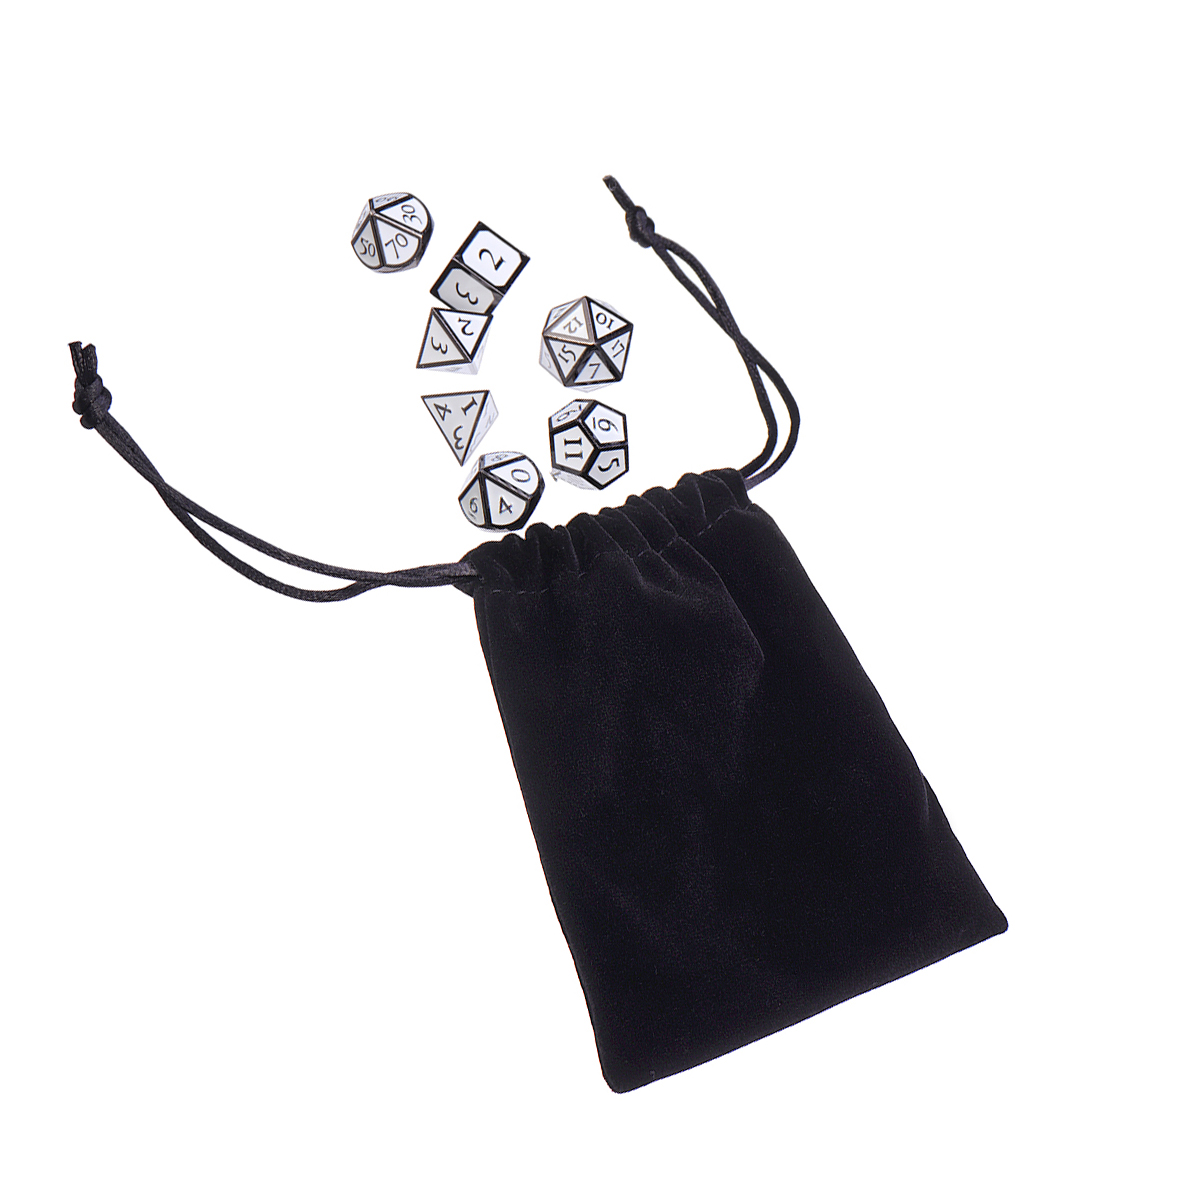 7Pcs-Zinc-Alloy-Enamel-Dices-Set-Polyhedral-Solid-Metal-Dice-Role-Playing-Game-Dice-Gadget-RPG-1374946-3